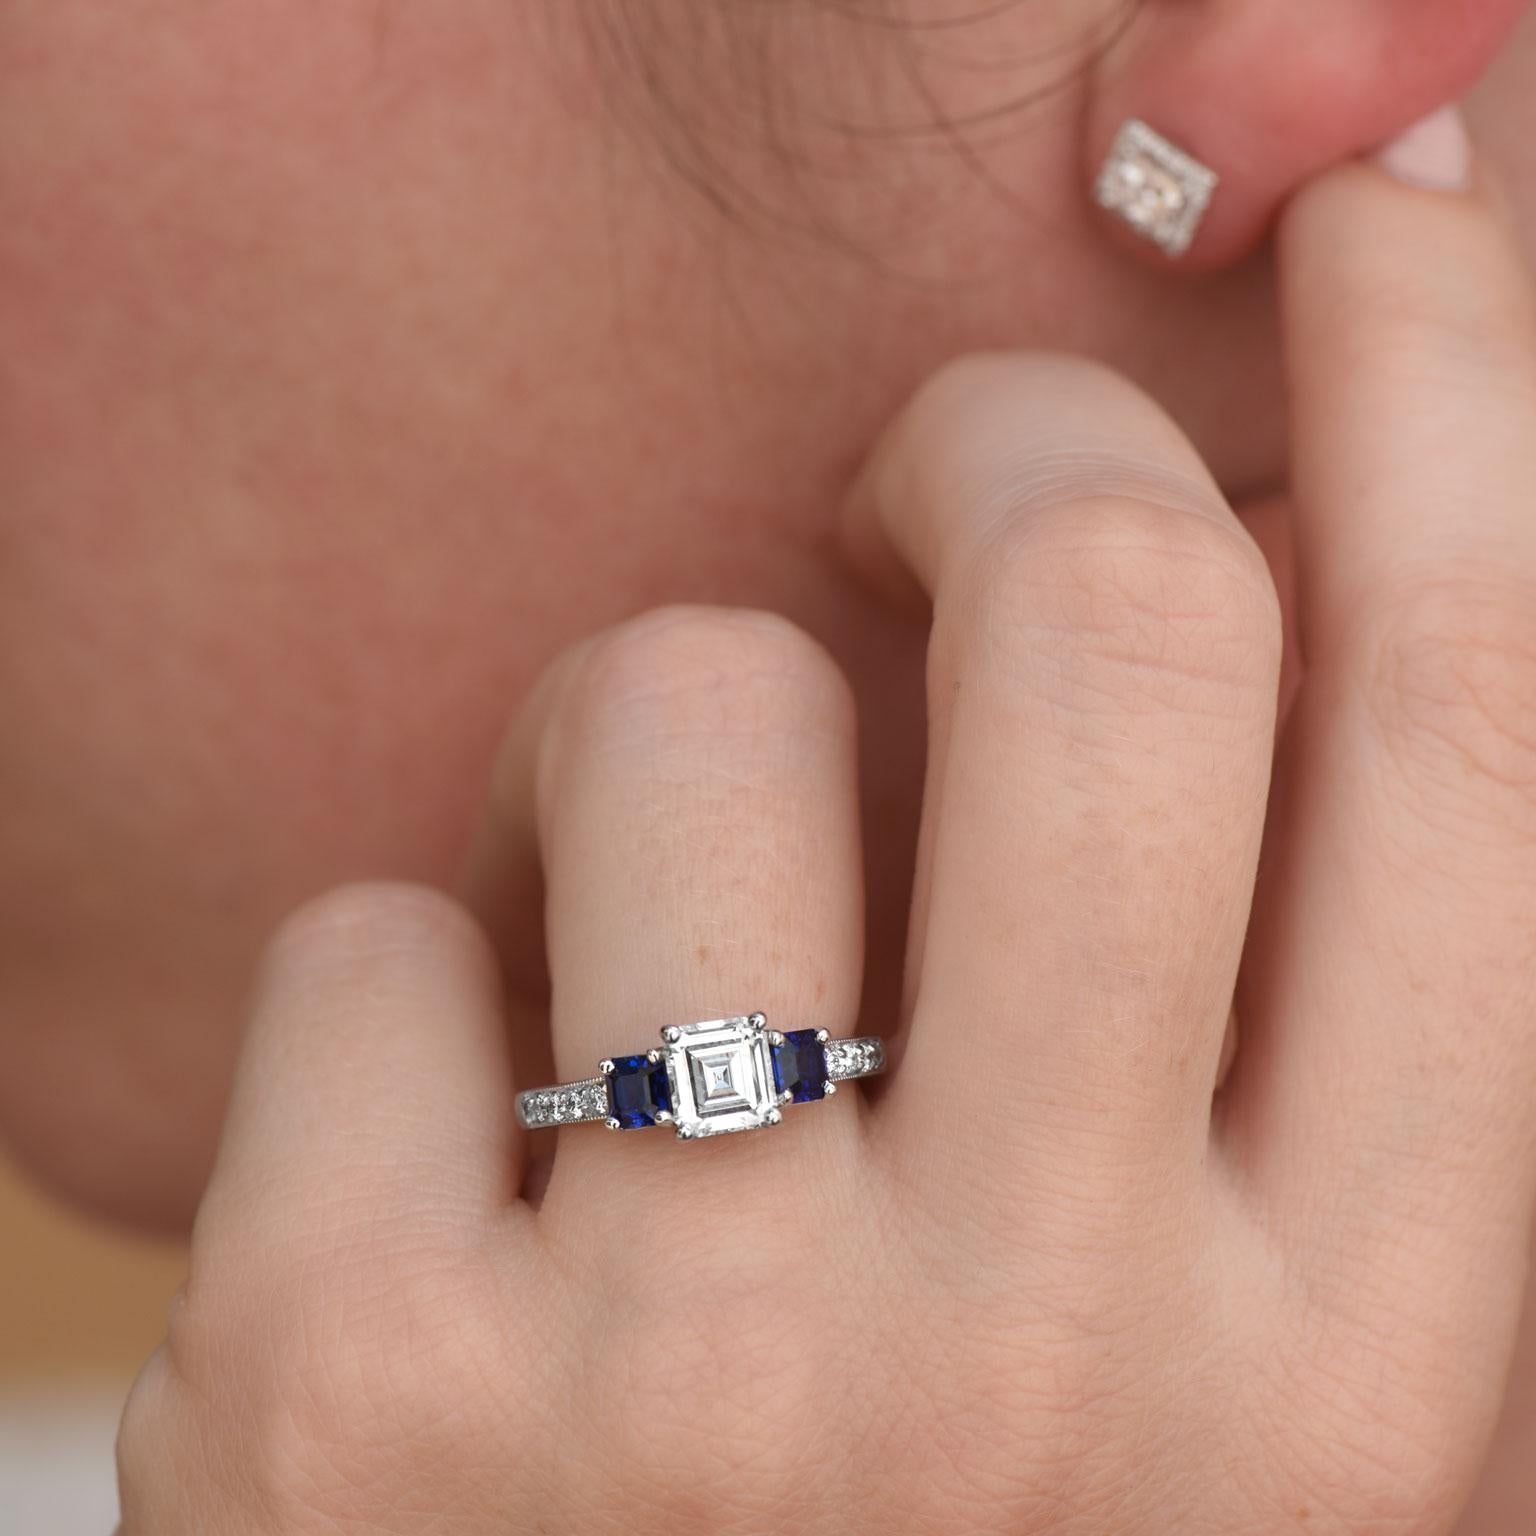 H&H GIA Cert 1.02 Carat Square Emerald Cut Diamond Ring 2 Assher Blue Sapphires In New Condition For Sale In Miami, FL